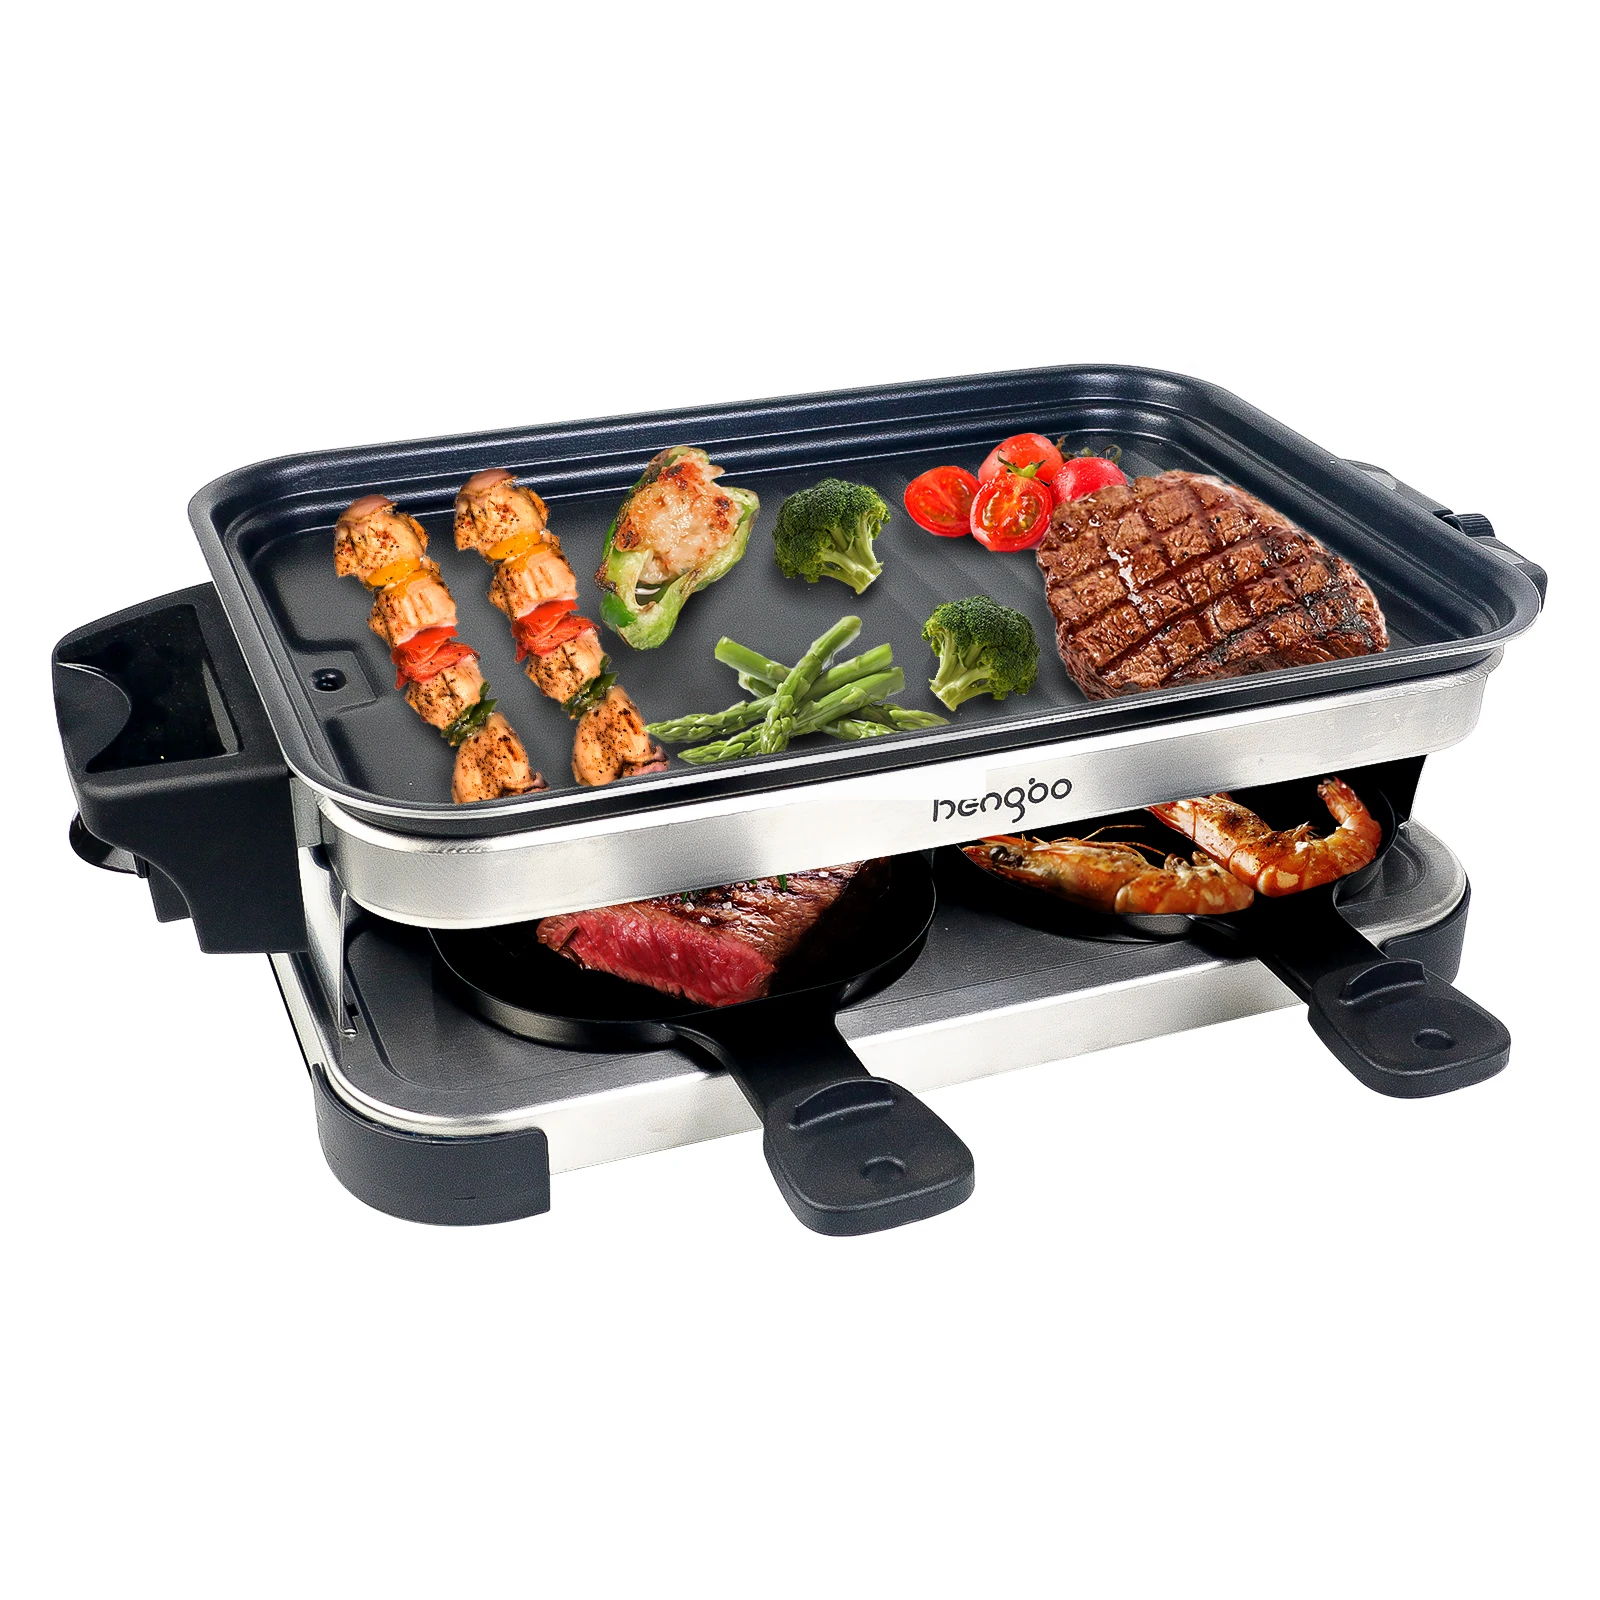 rommel rand schors Electric Raclette Grill For 8 Person Use,Raclette Grill Non-stick Plate,Raclette  Grill With Dismountable Oil Collector - Buy Black Grill With 4 Middle  Raclette Pan,Smokeless Product on Alibaba.com